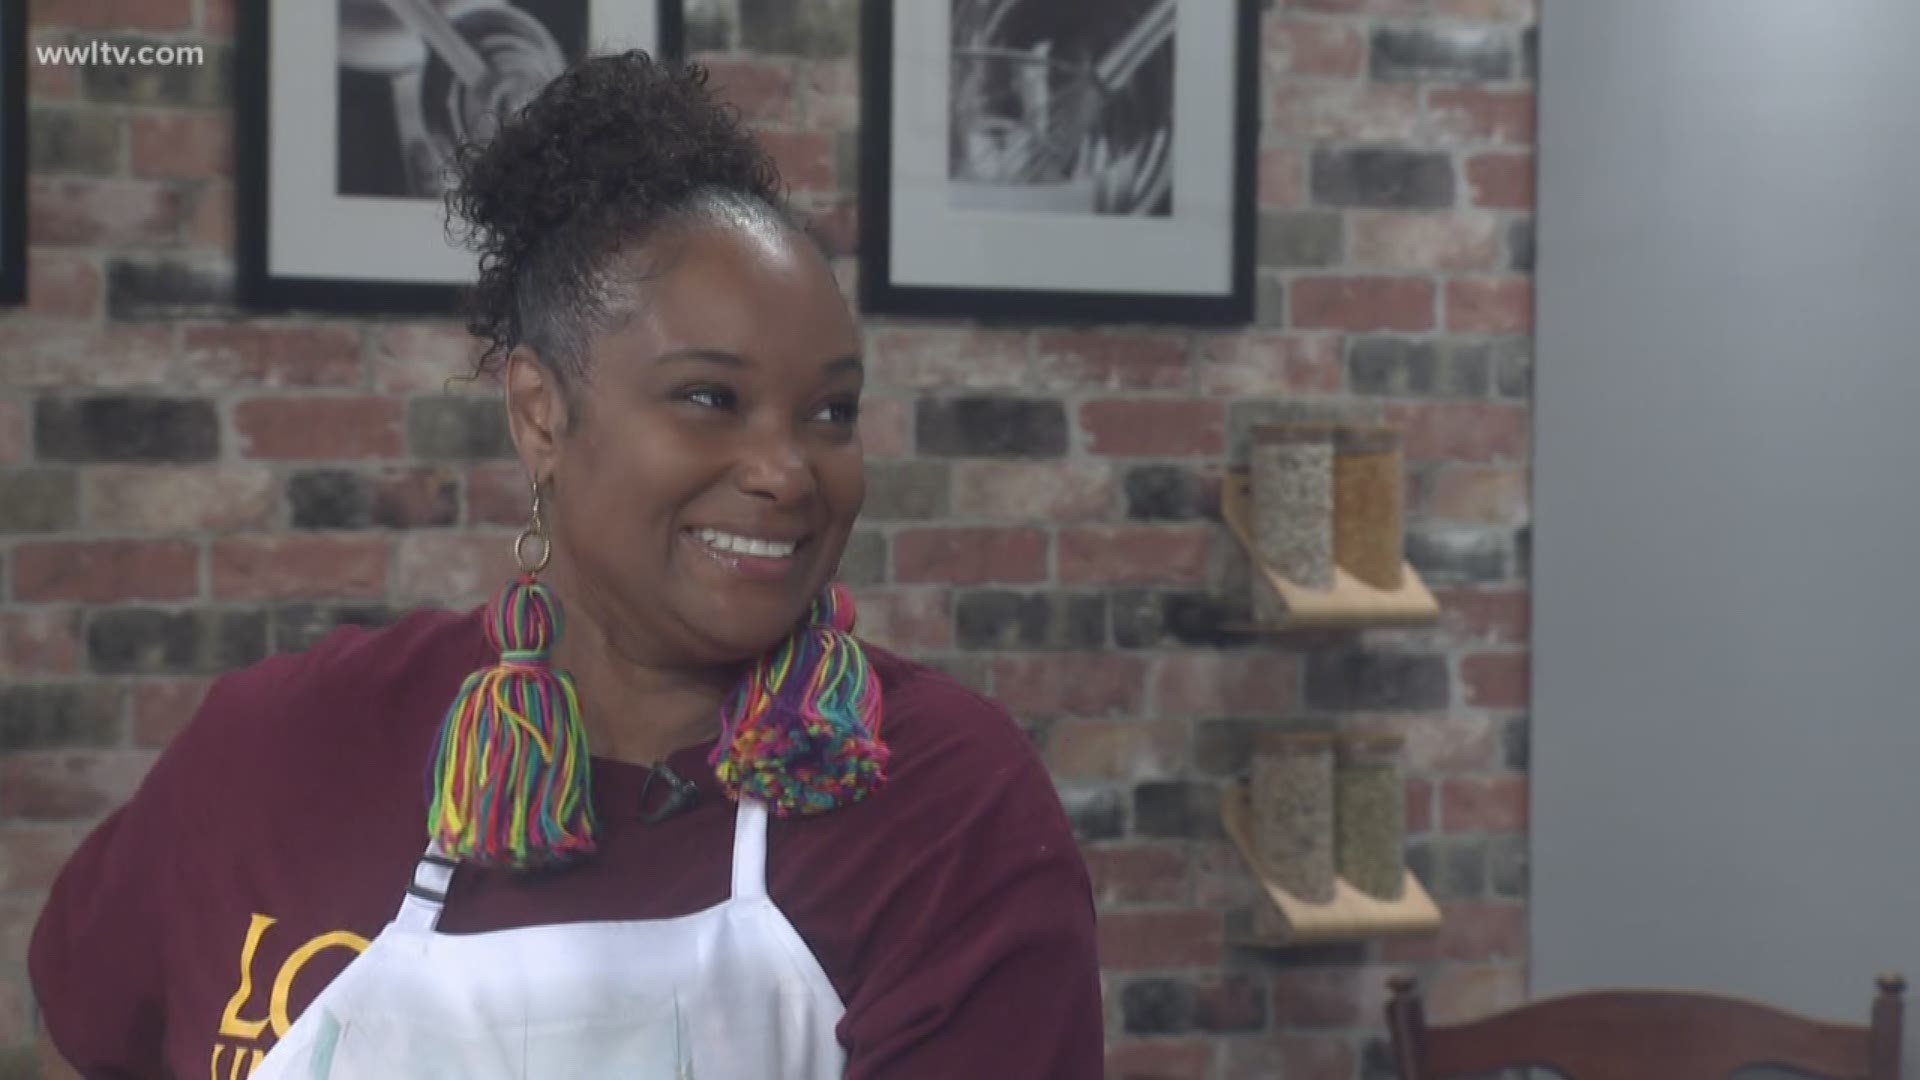 Famed Female Rapper turned Professor Mia X is in the kitchen telling us about her great new role over some delicious Gumbo Wings.